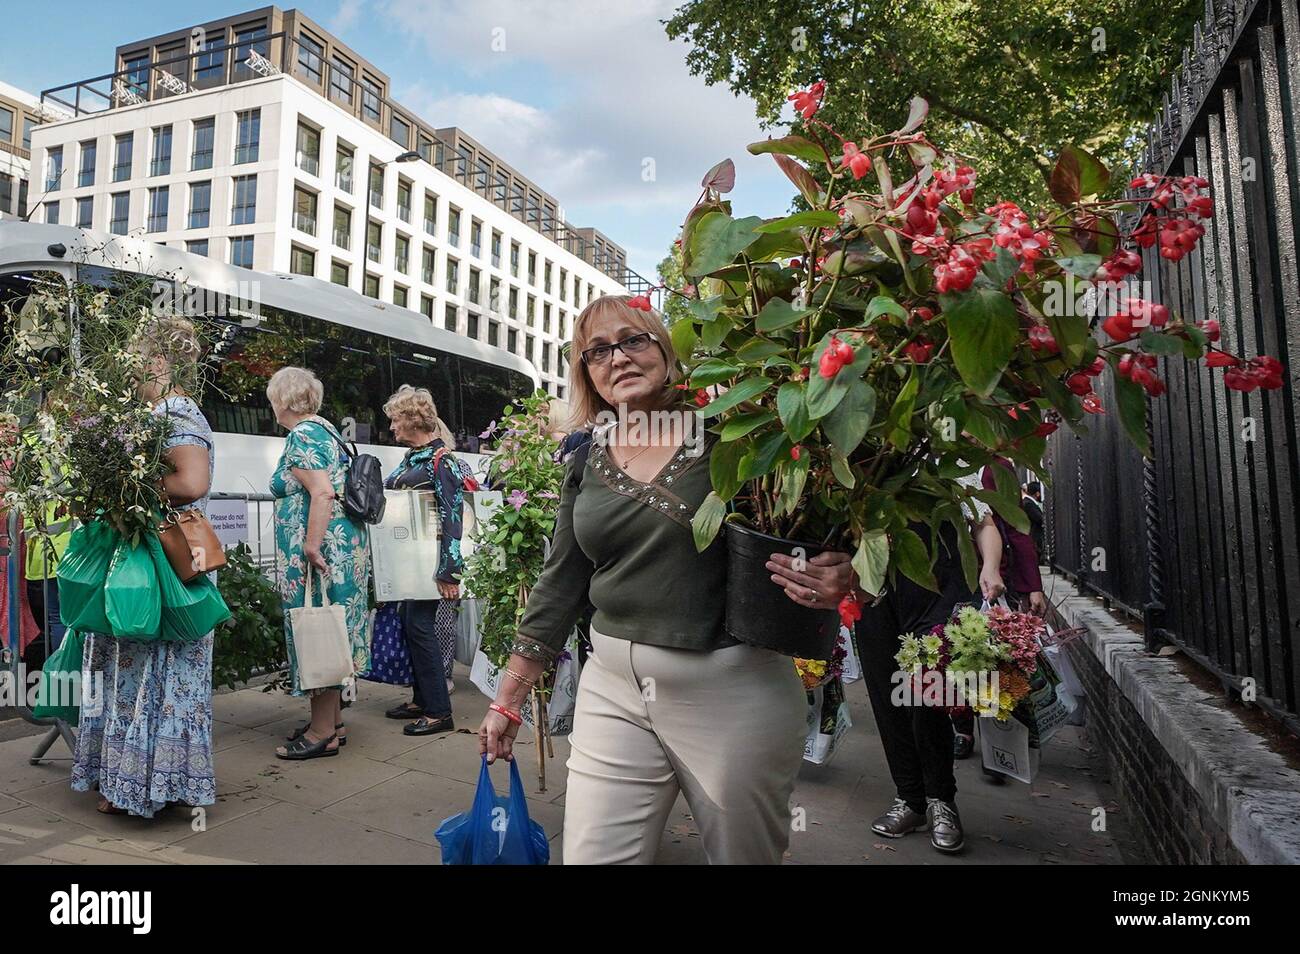 London, UK. 26th September 2021. Chelsea Flower Show plant sell-off. Plant bargains are swiftly carried away on the final day of RHS Chelsea Flower Show - which sees many exhibitors selling off their plants to the public at knock-down prices. Credit: Guy Corbishley/Alamy Live News Stock Photo